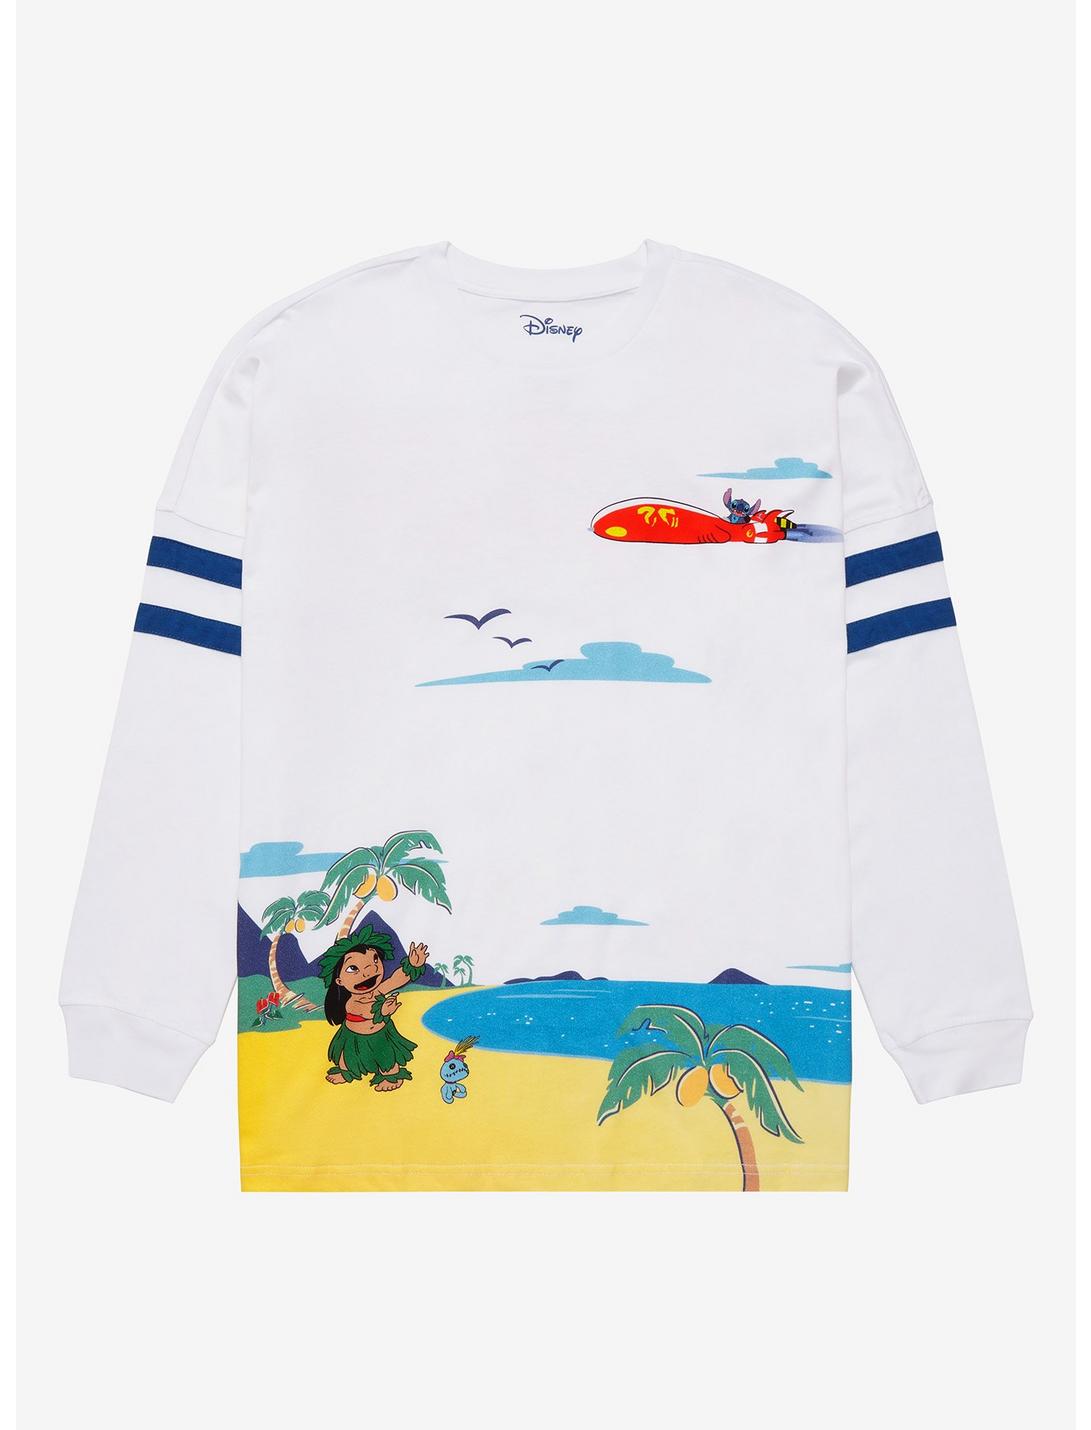 Disney Lilo & Stitch Experiment 626 Beach Hype Jersey - BoxLunch Exclusive, OFF WHITE, hi-res